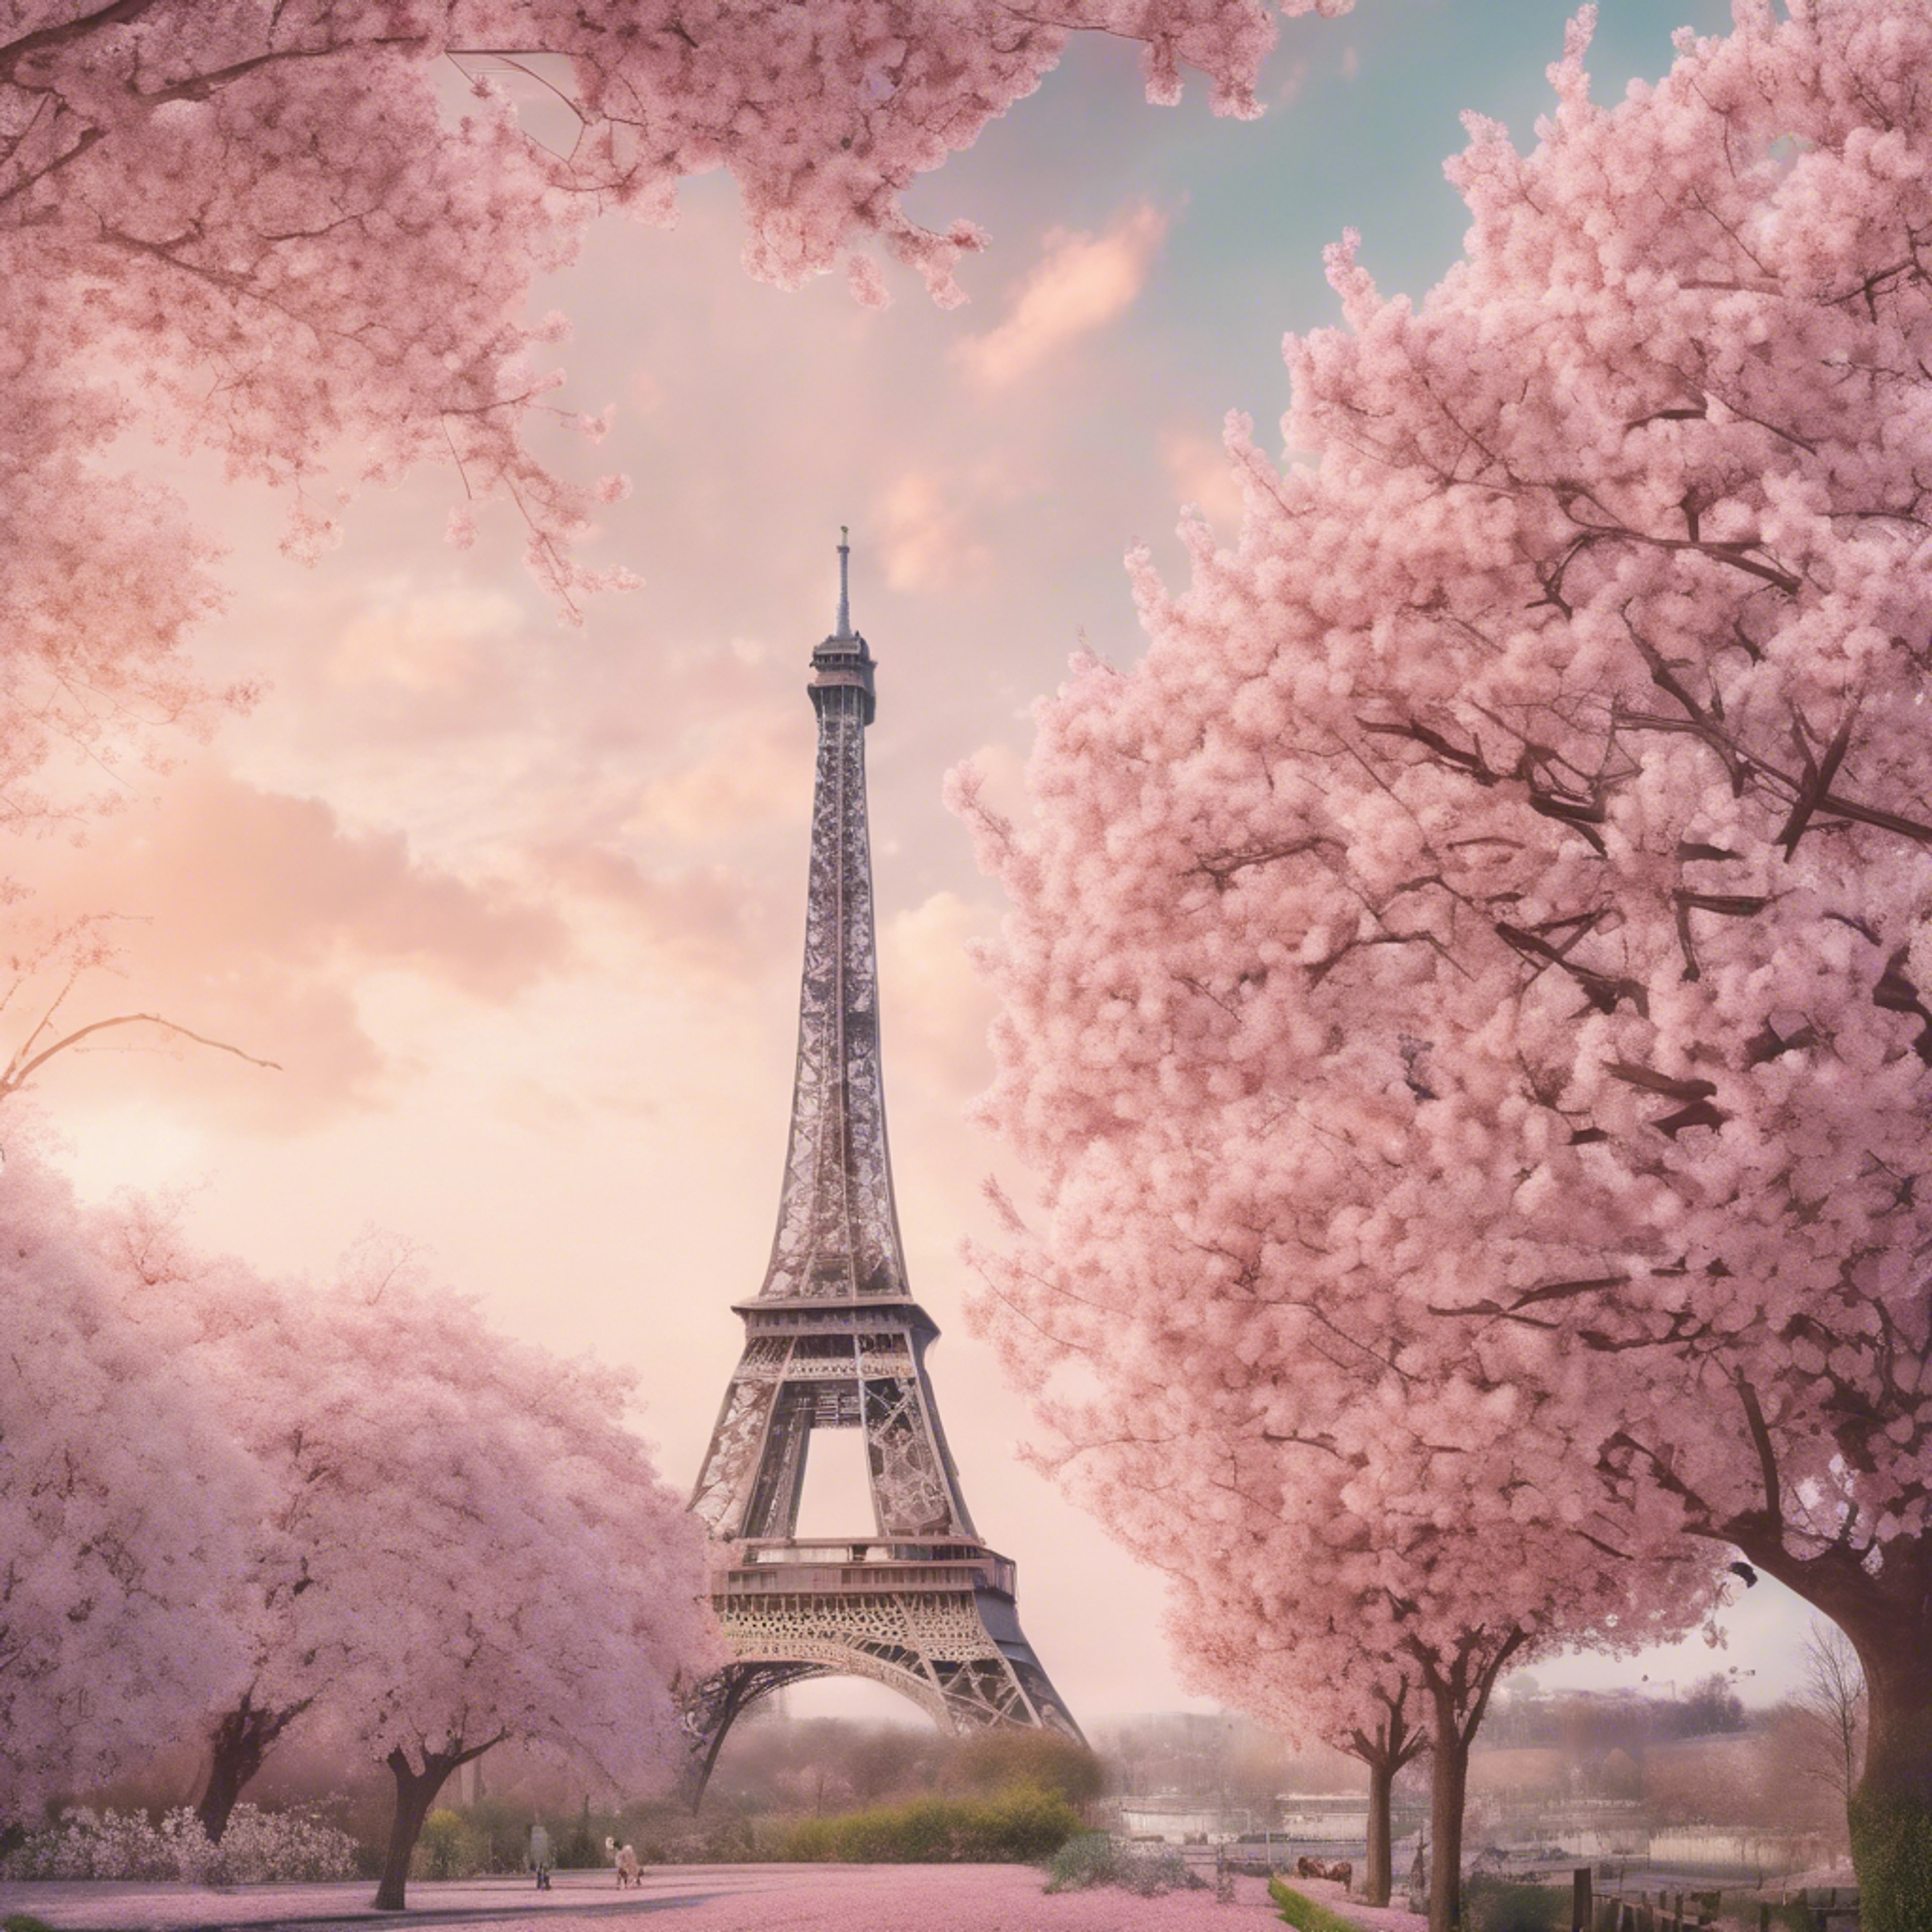 A dreamy pastel artwork of the Eiffel Tower enveloped in cherry blossoms during spring. Ταπετσαρία[34c320f998cf44e290fc]